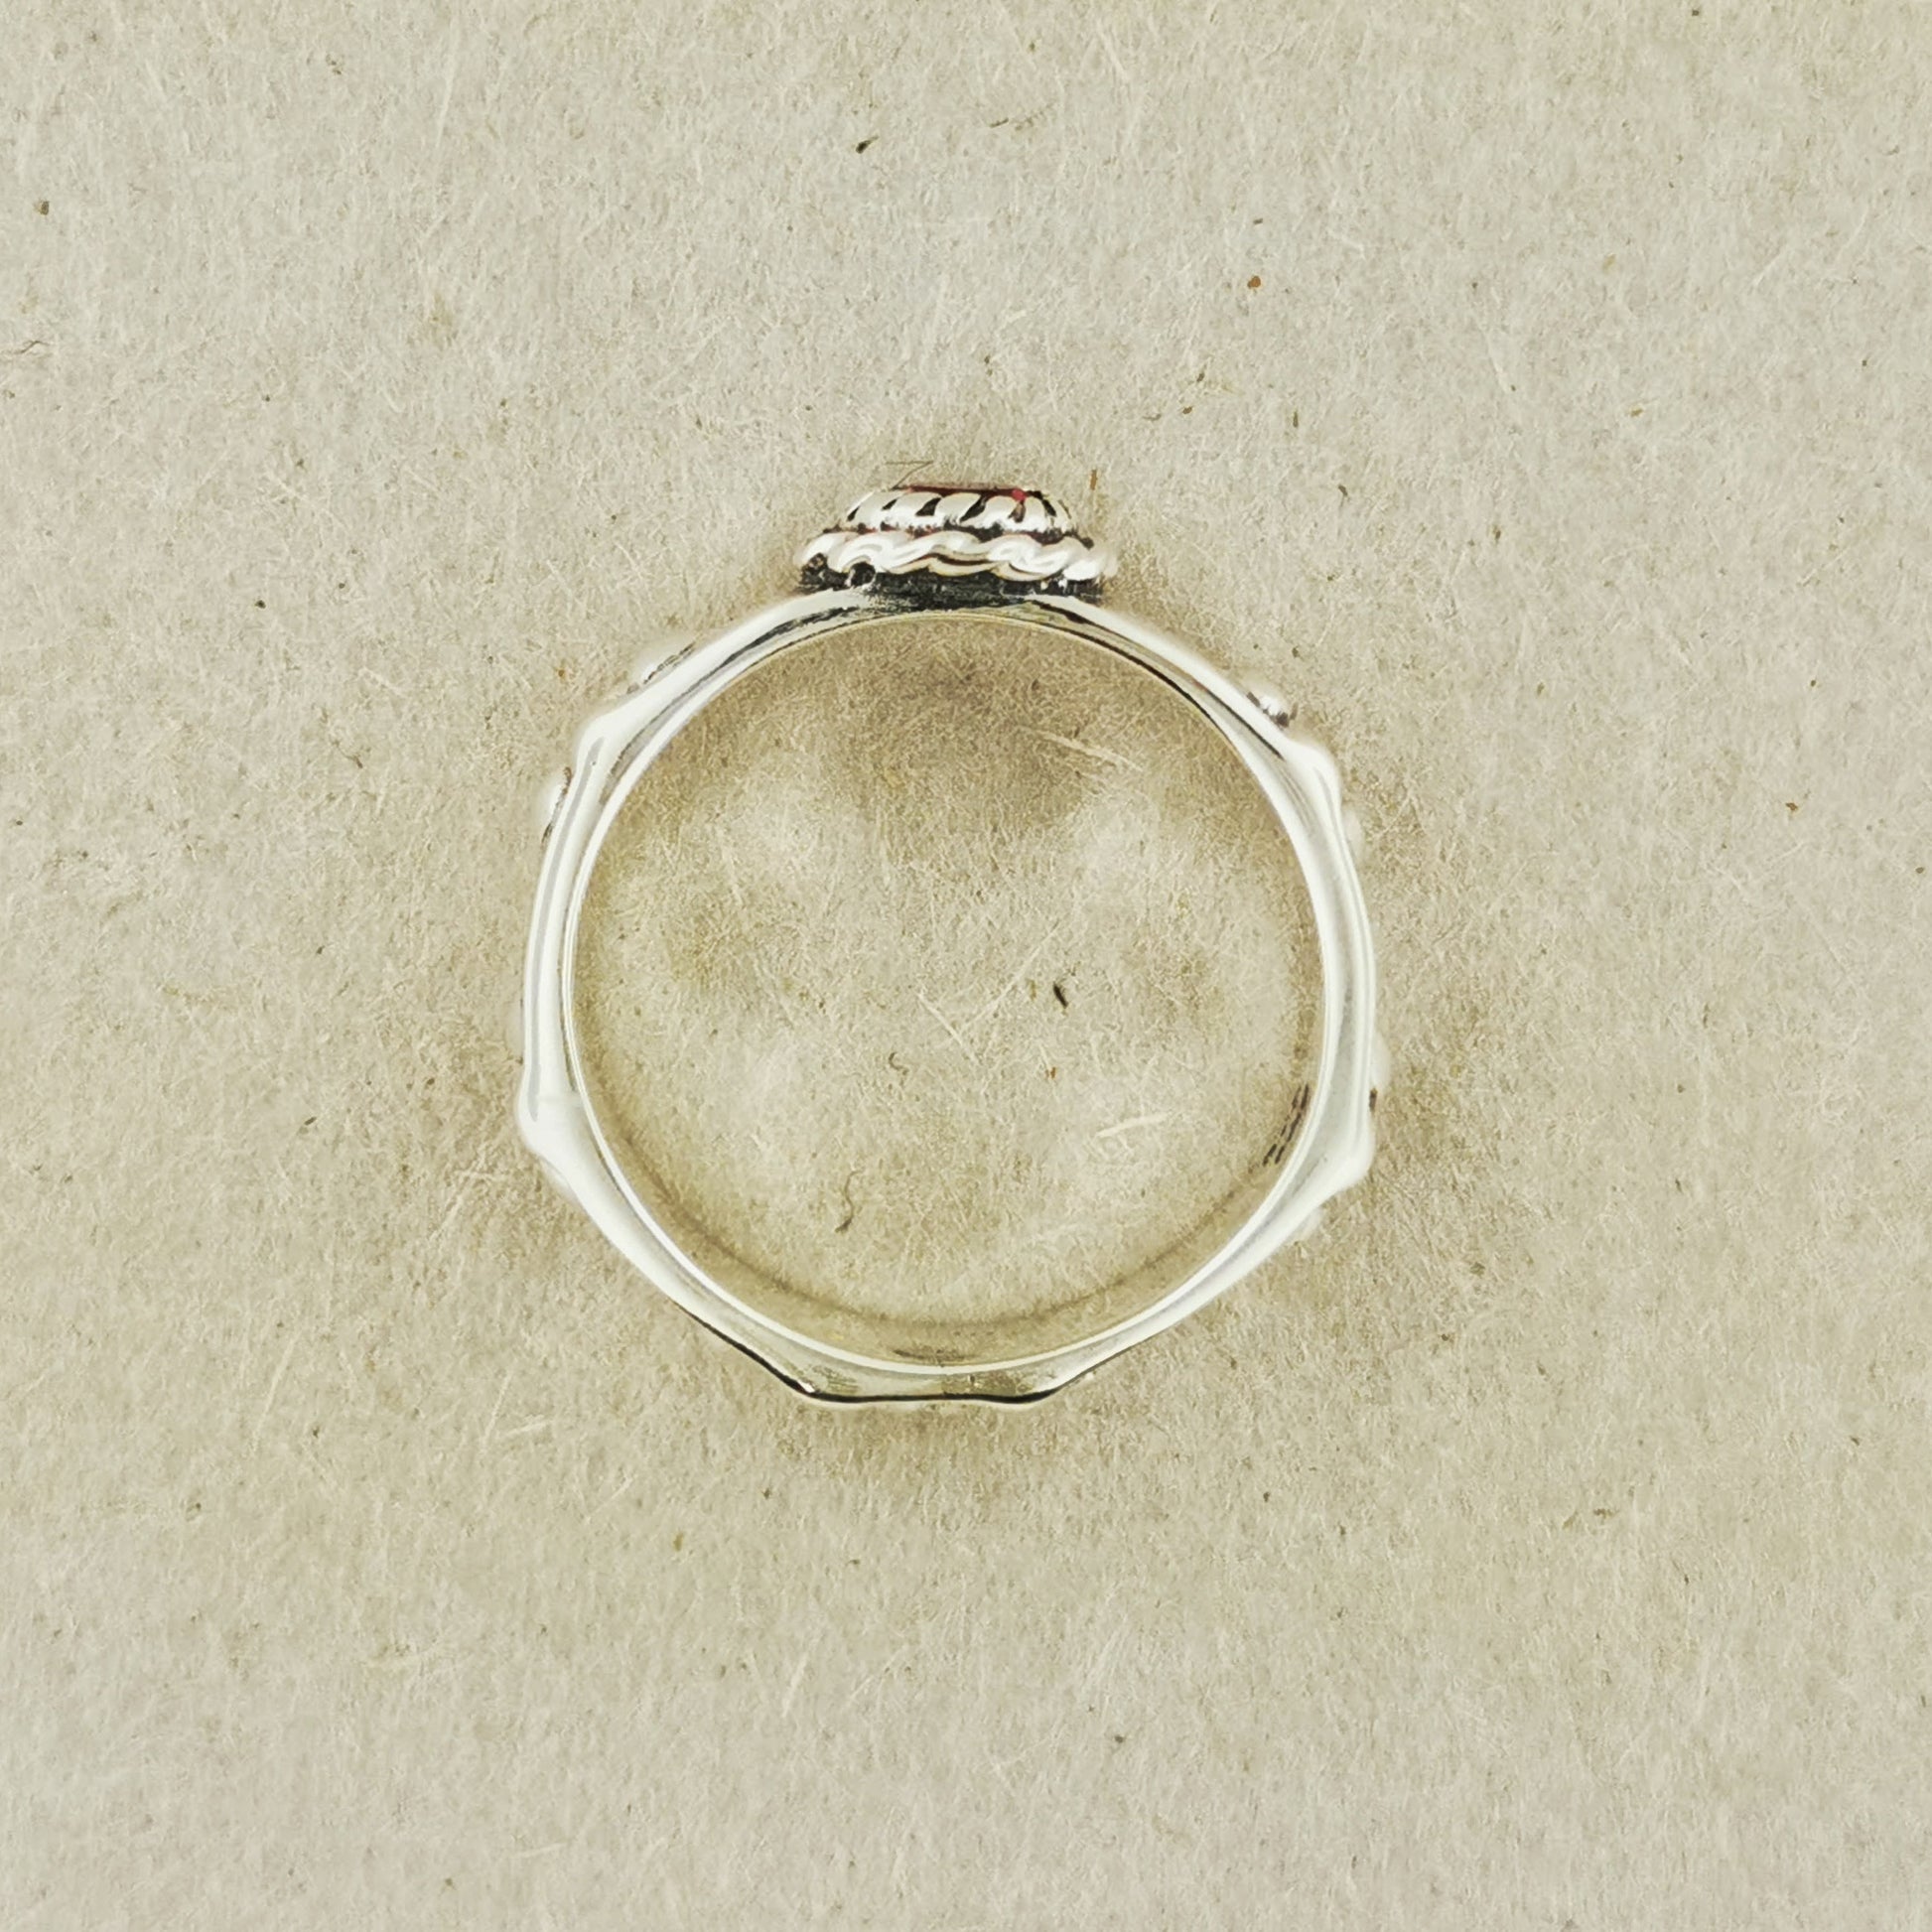 Matching Howl and Sophie Ring Set in Sterling Silver, Howl Moving